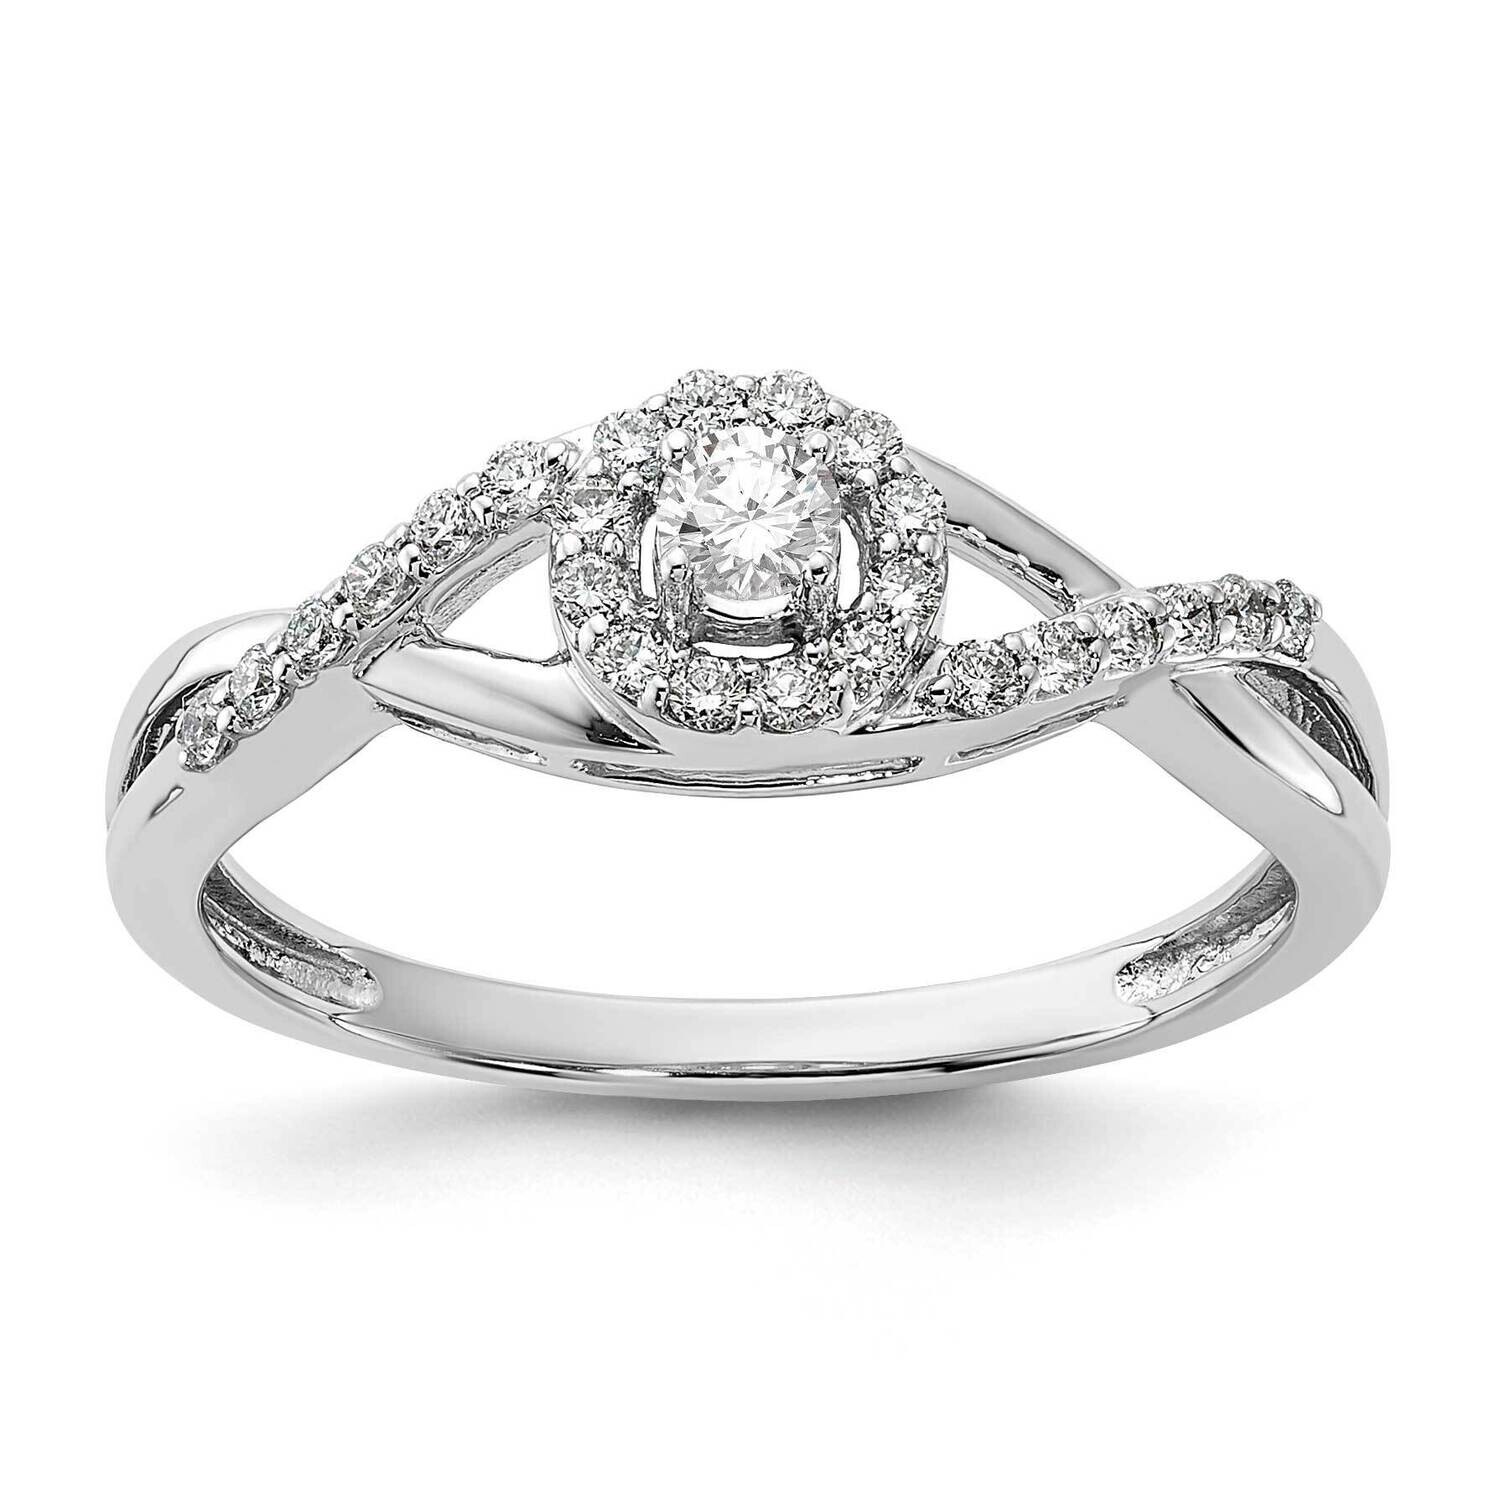 Diamond Complete Halo Engagement Ring 14k White Gold RM2176E-010-WAA